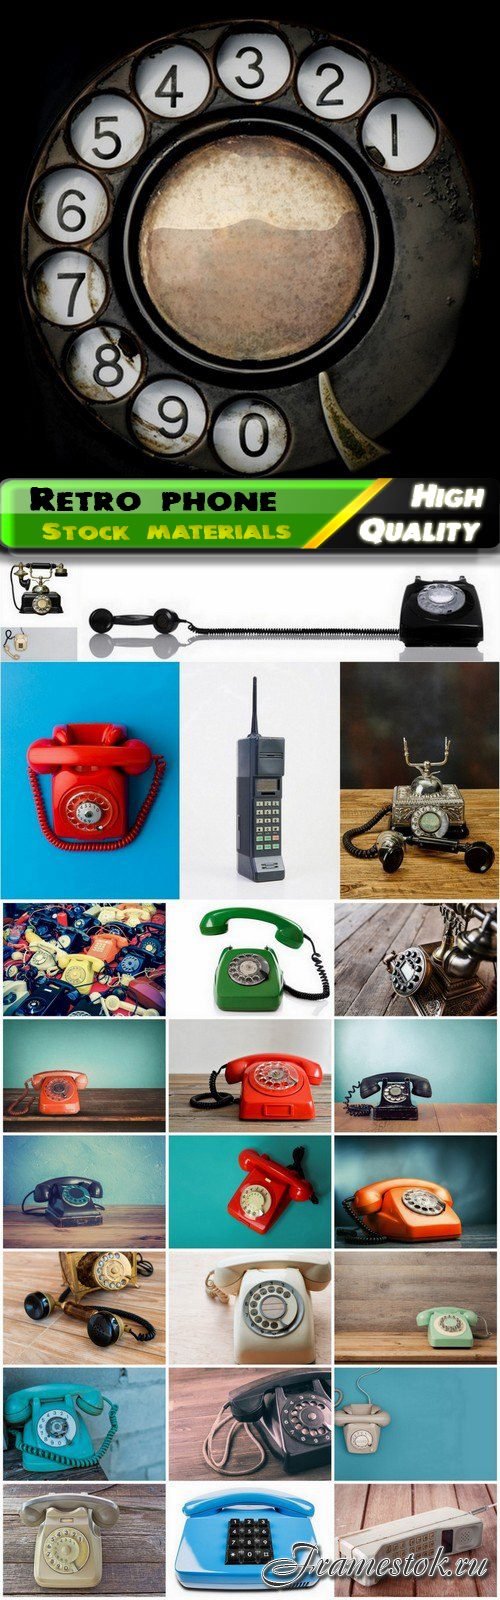 Retro phone communication and mobile satellite connection 25 Eps